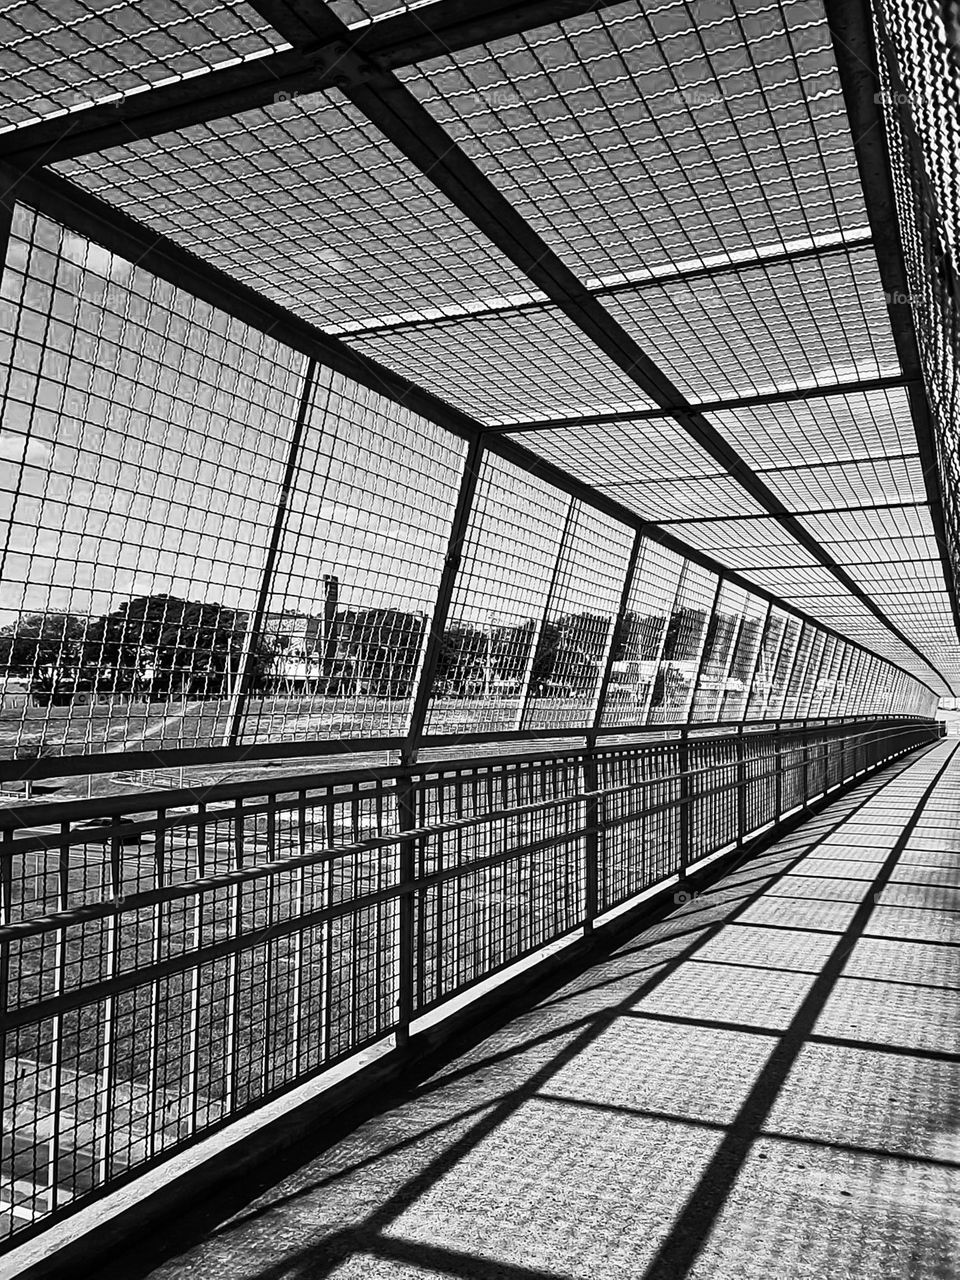 Multiverse B&W: The serene repetition of the security rails of a Catwalk and its shadows